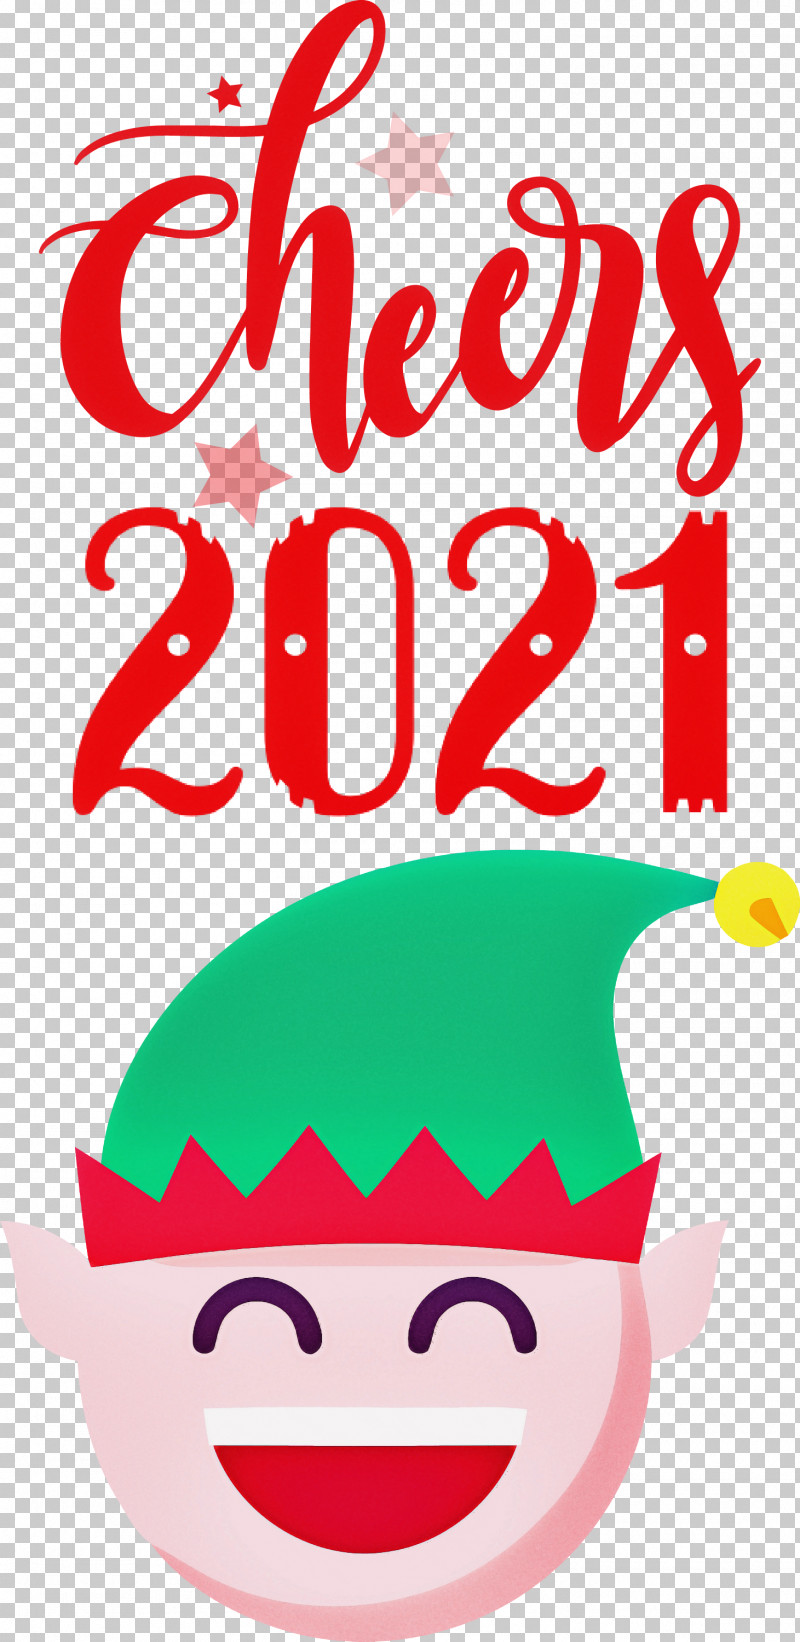 Cheers 2021 New Year Cheers.2021 New Year PNG, Clipart, Artfree, Cheers 2021 New Year, Free, Silhouette Free PNG Download